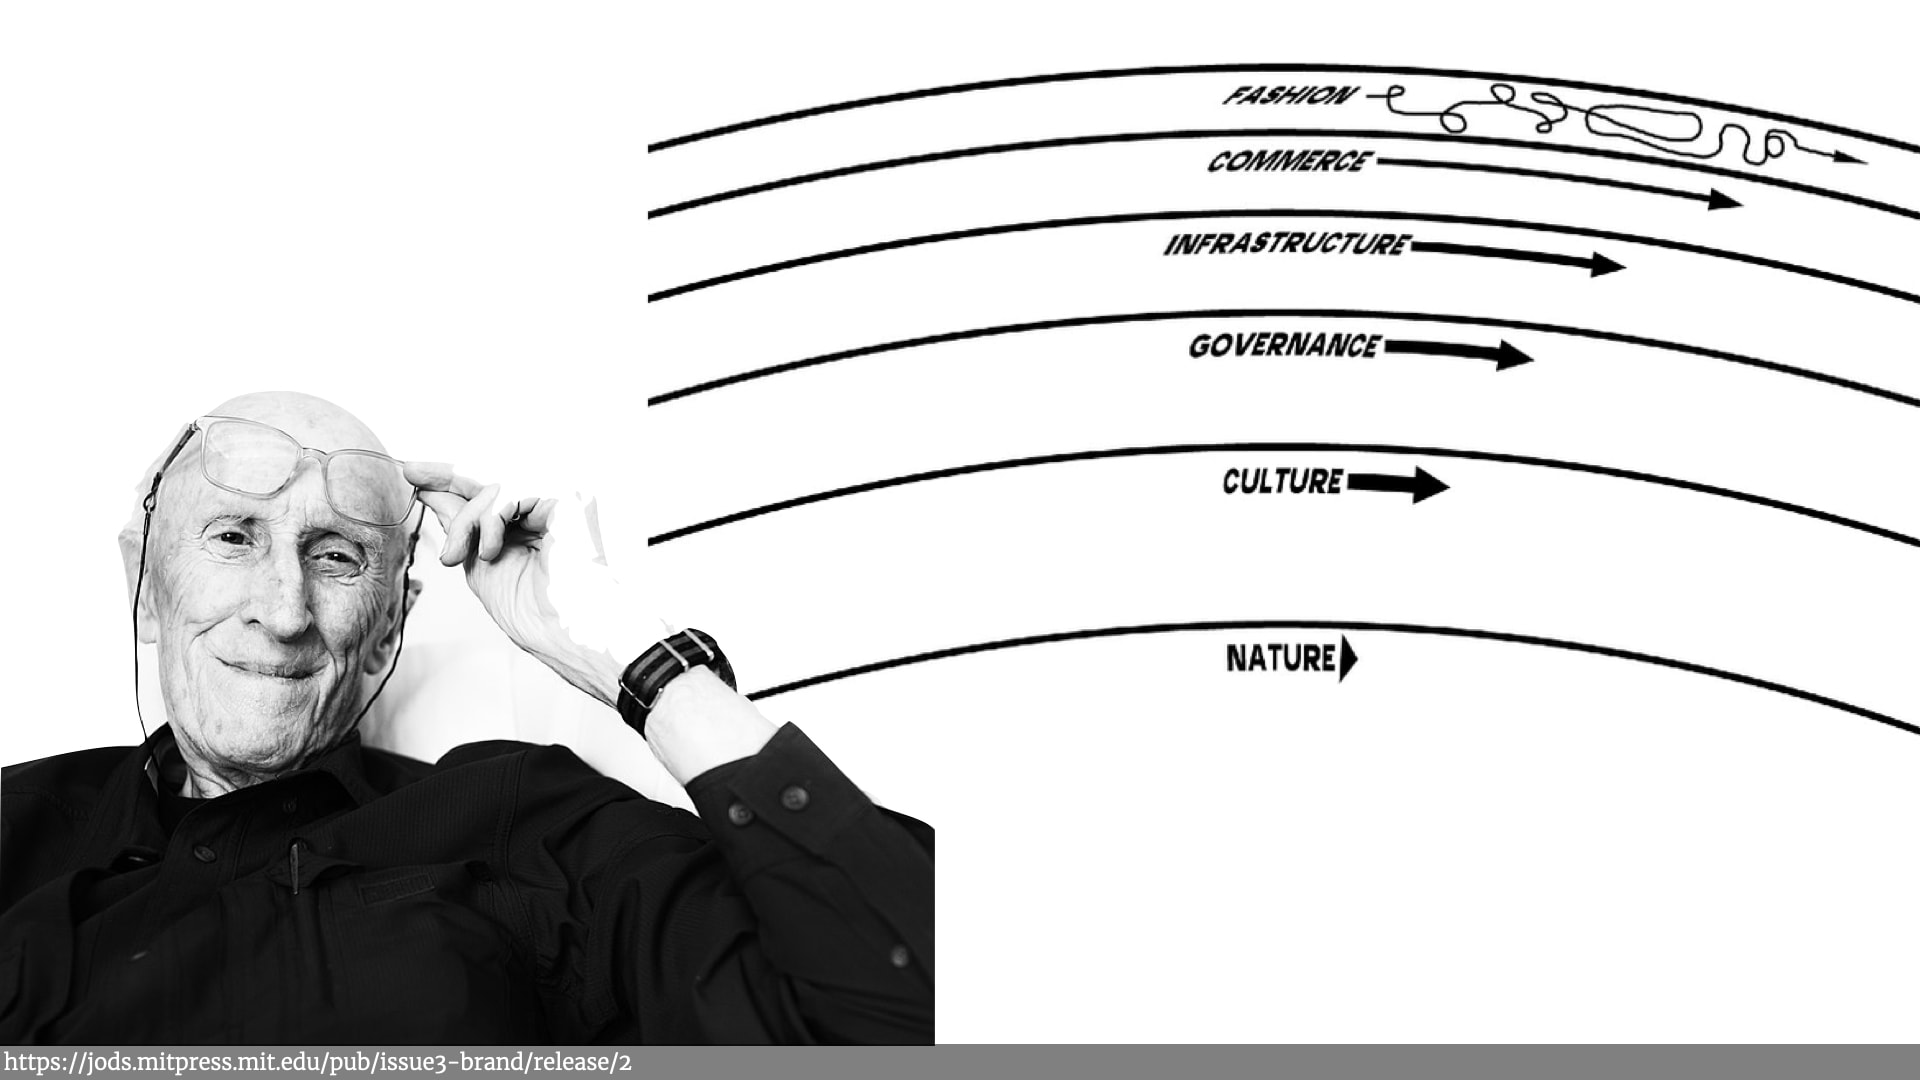 To the left is a black and white picture of Stuart Brand lifting his glasses to his forehead. To the right is a stylised illustration of pace layers 'fashion' at the top, supported by 'commerce', 'infrastructure', 'governance', 'culture' and finally 'nature'.